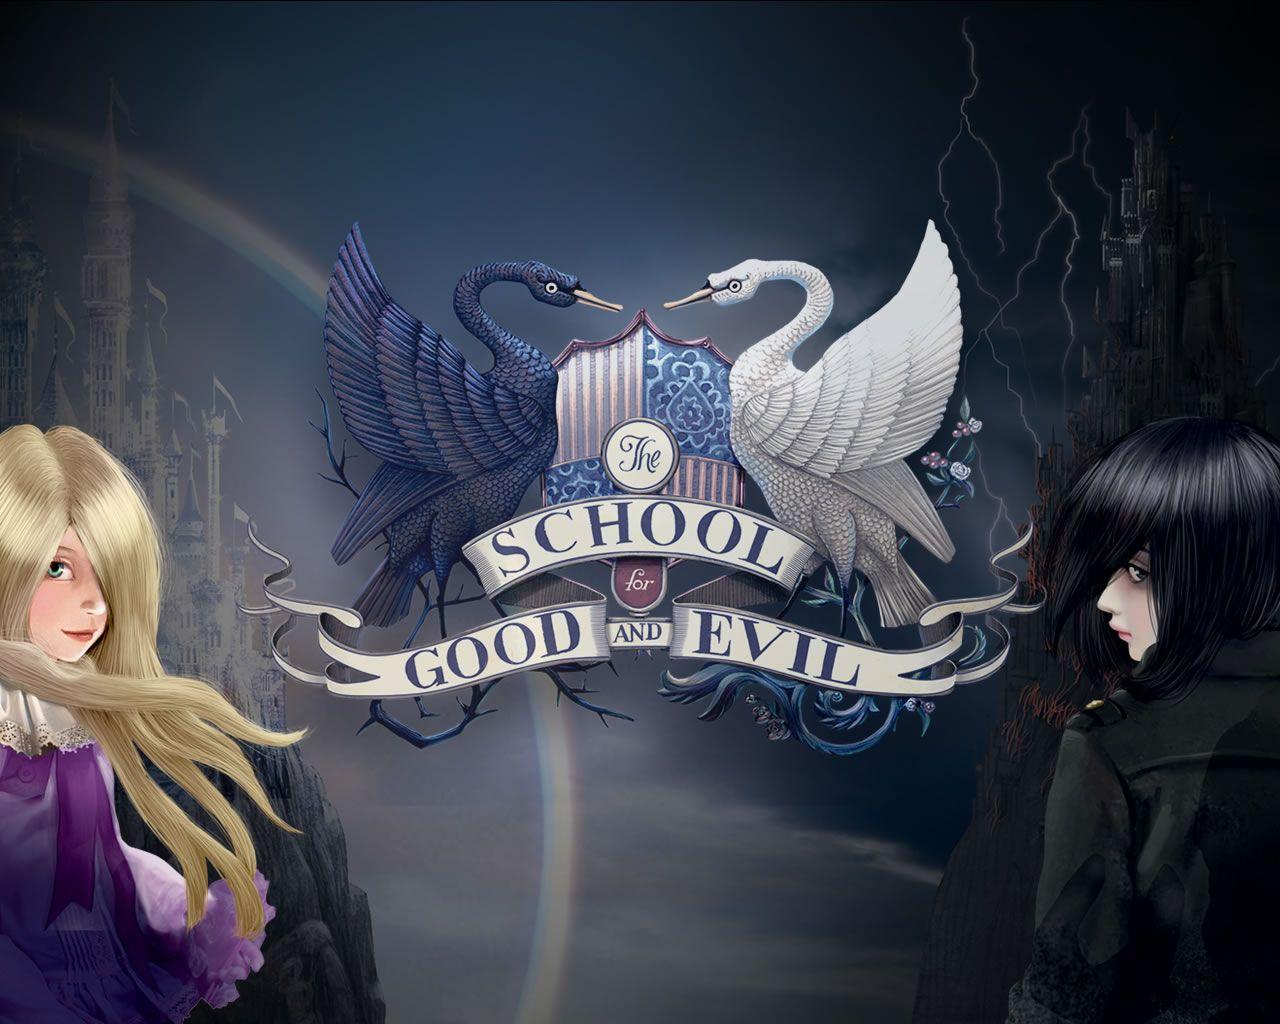 Wallpaper, artifacts & more. School for Good and Evil